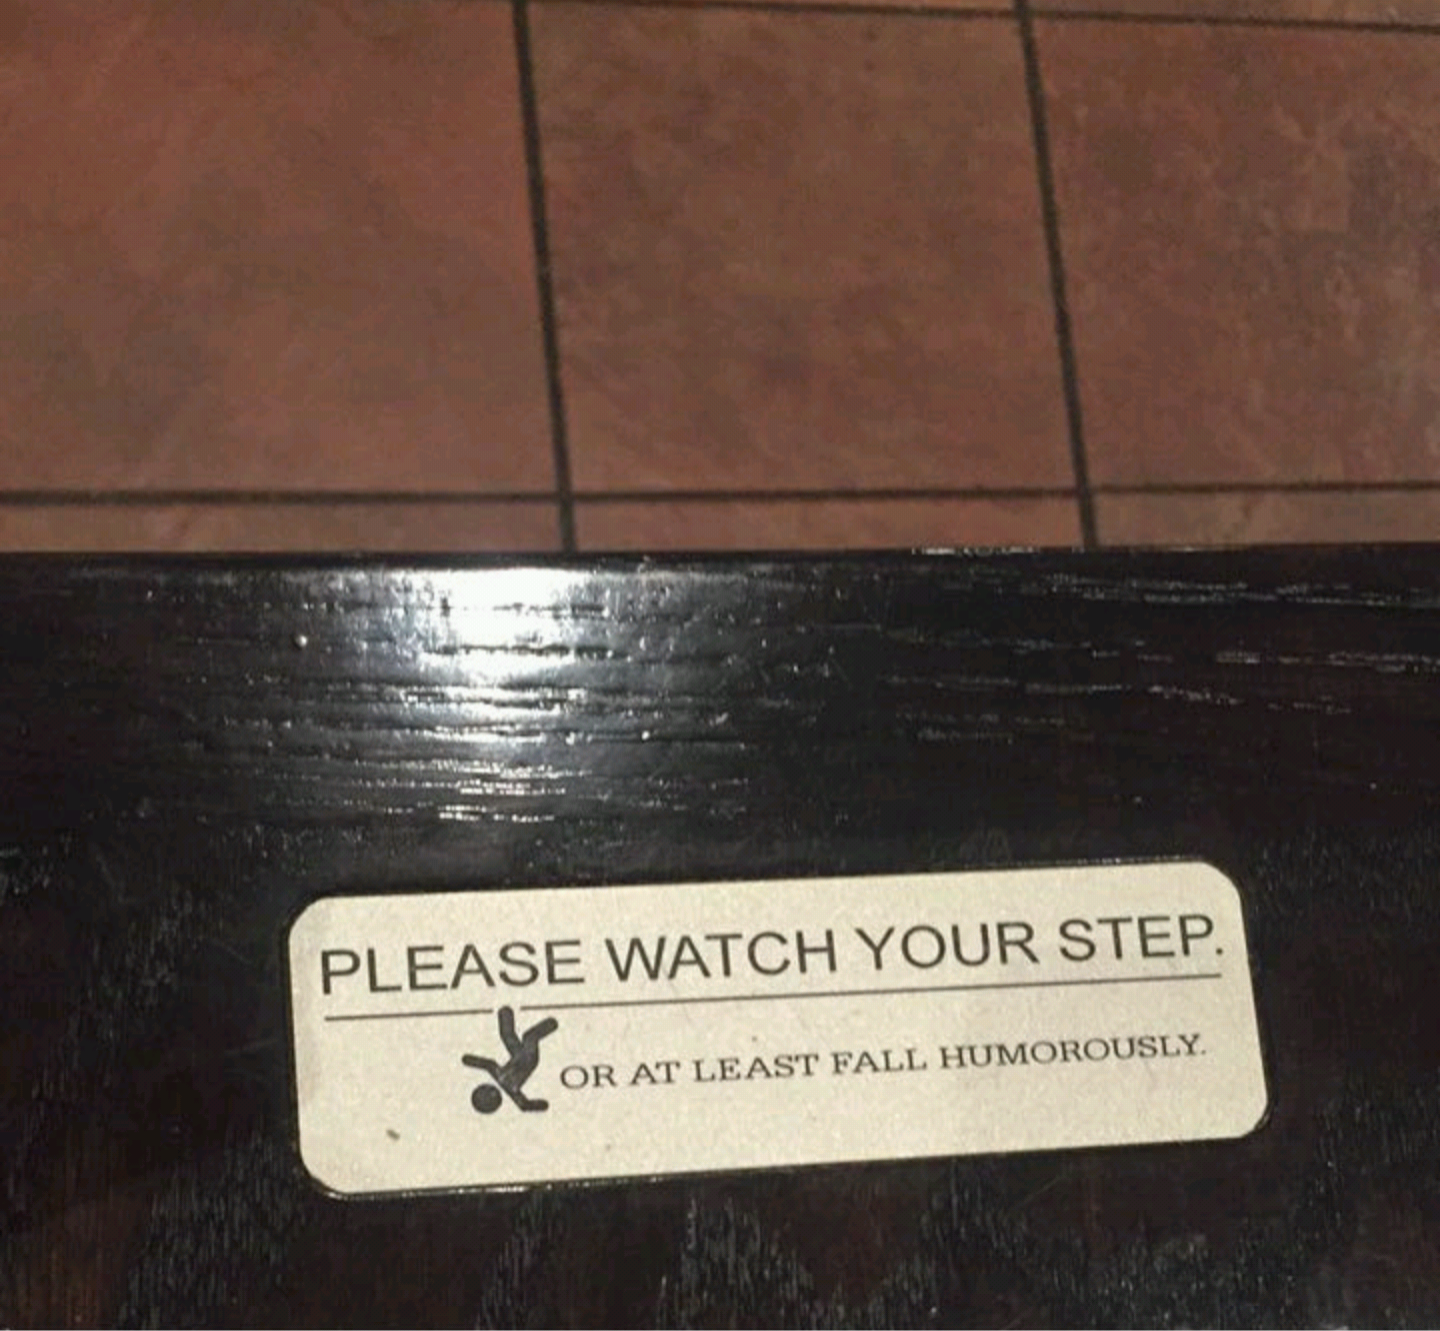 Please watch your step.